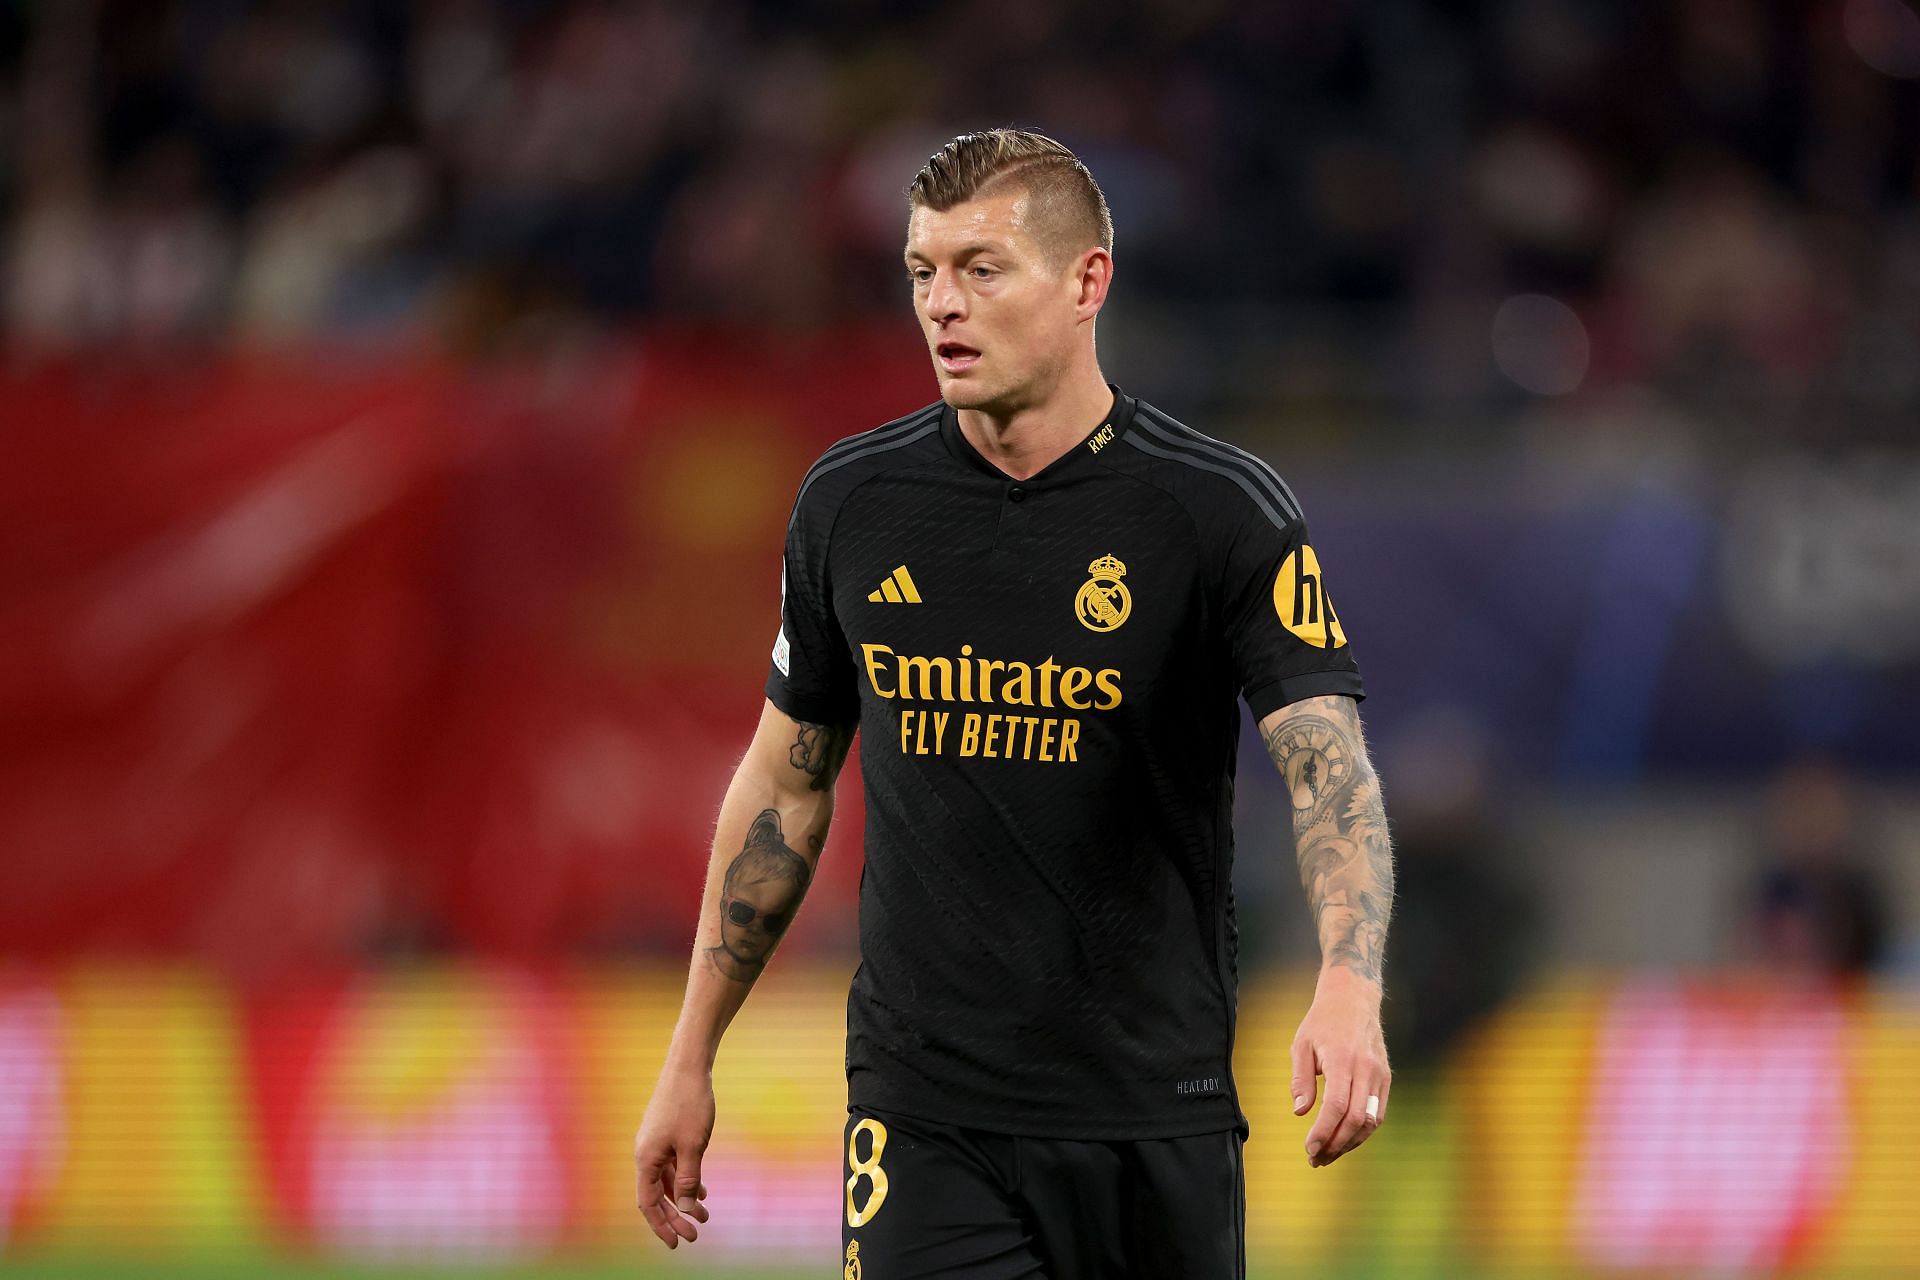 Toni Kroos will not return to the Allianz Arena this summer.